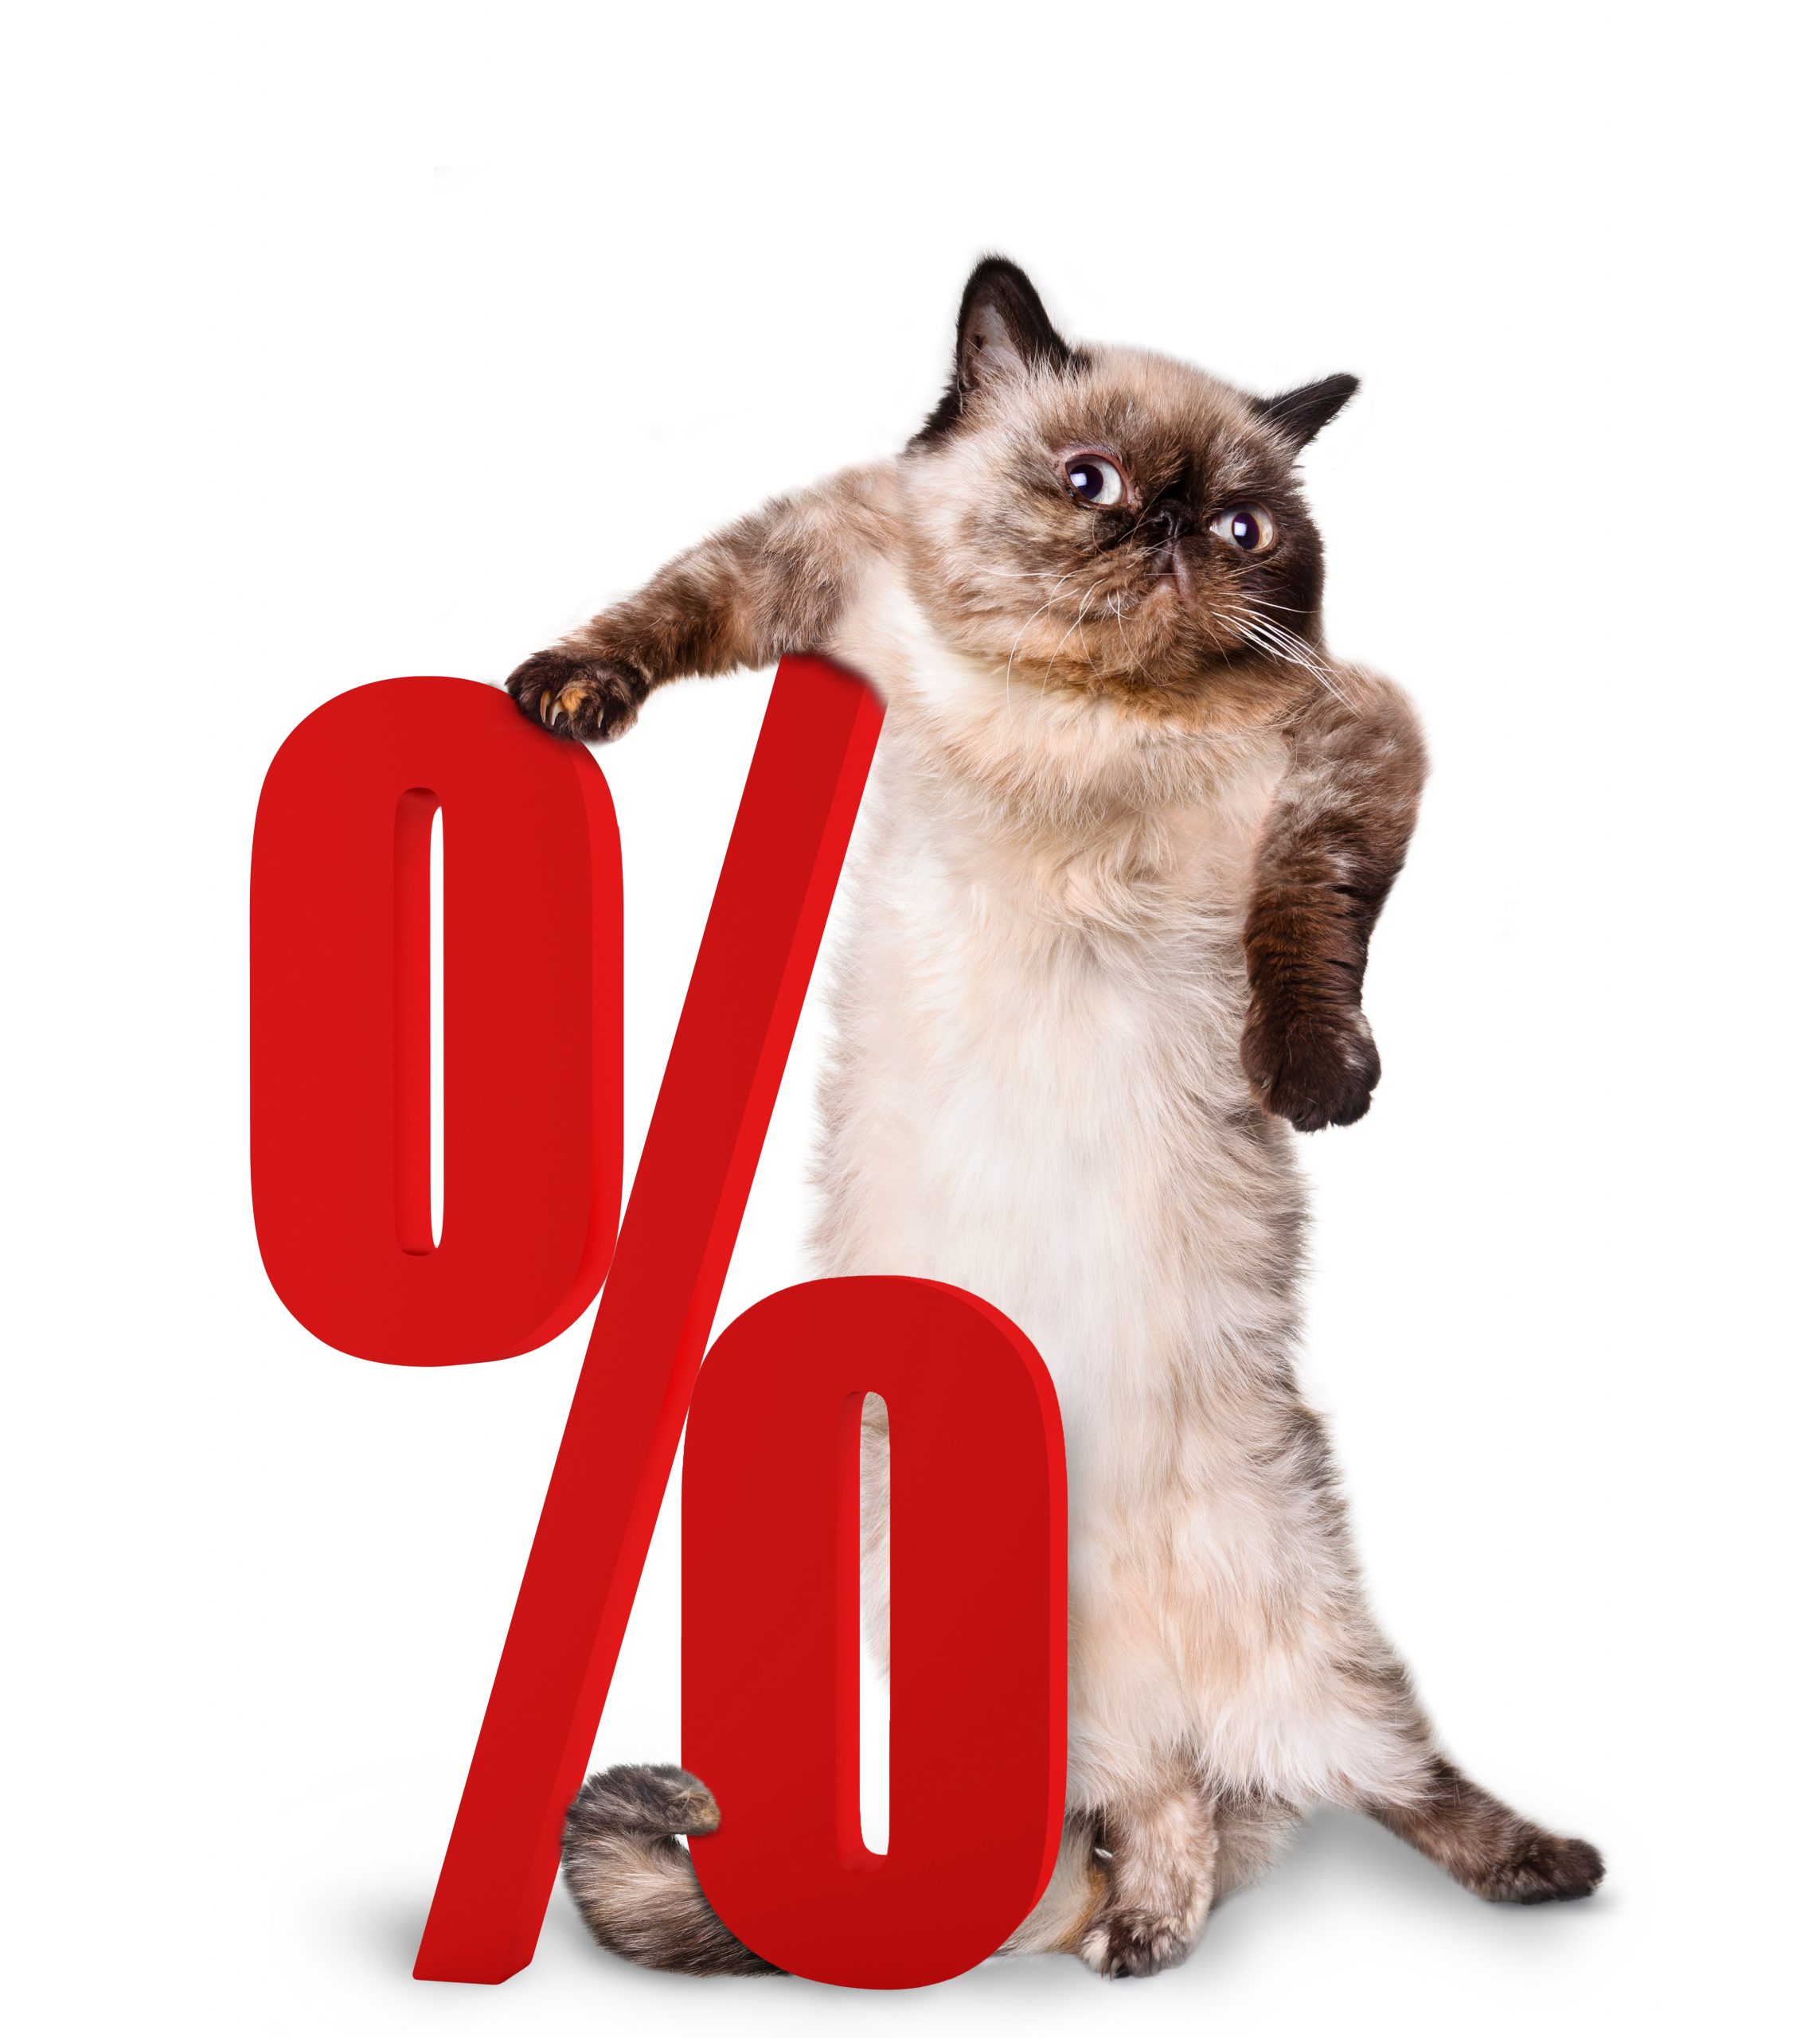 Cat with percent sign